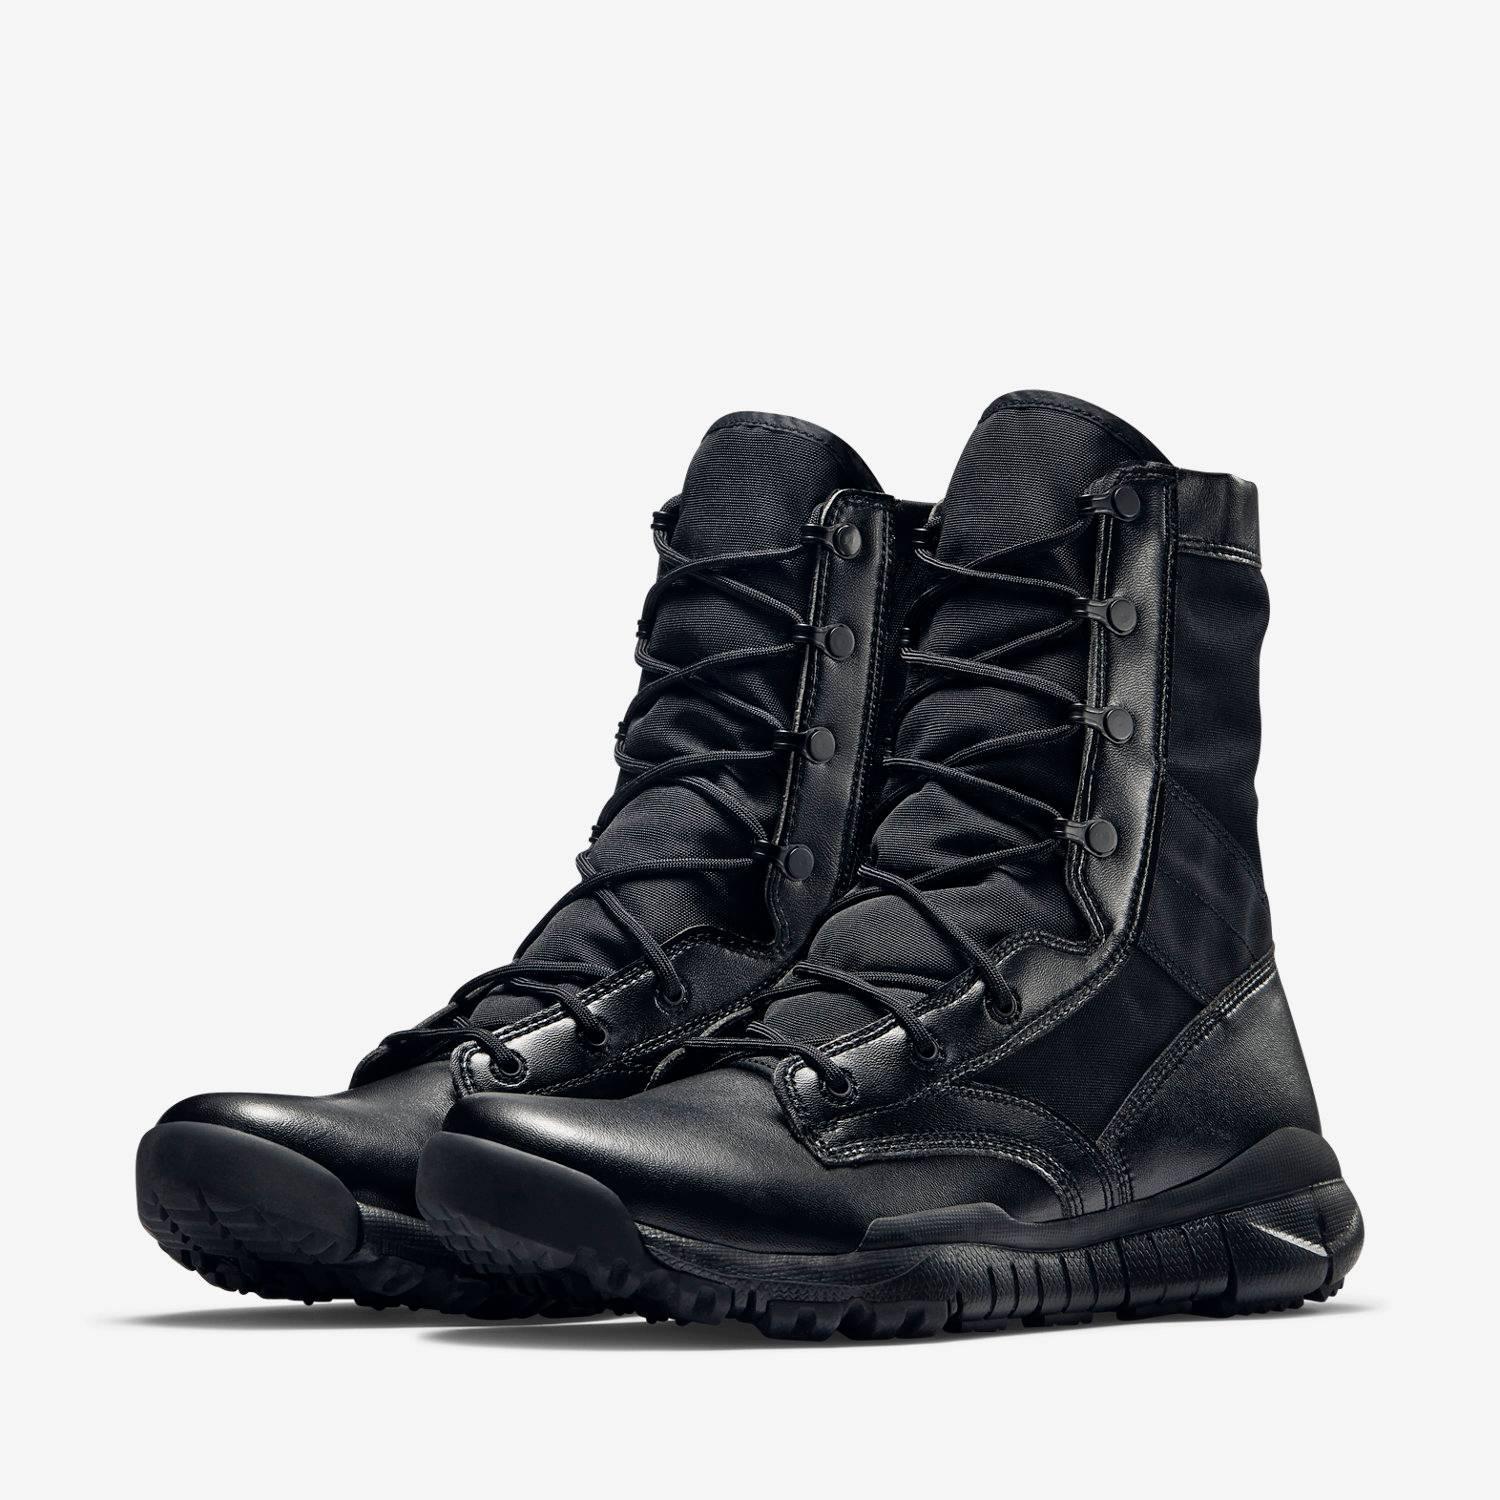 Nike Special Field Boot in Black for Men - Lyst